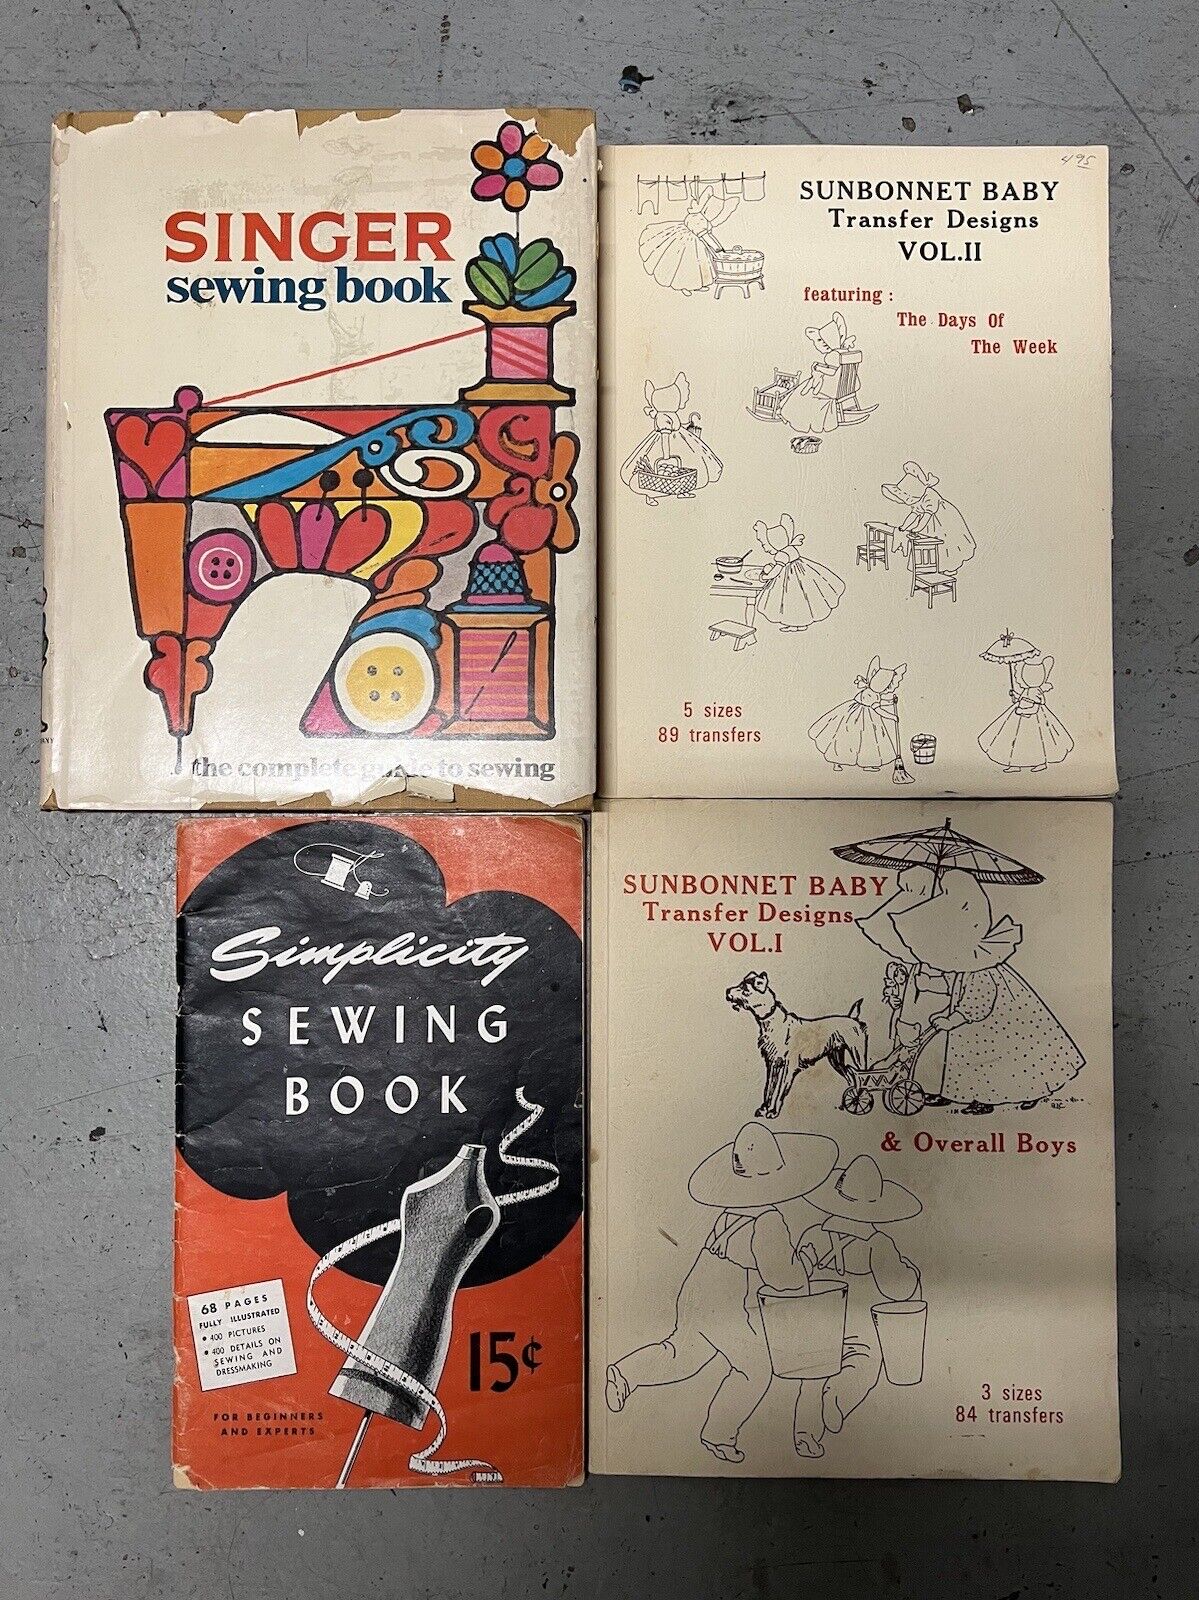 SEWING BOOKs SINGER THE COMPLETE GUIDE TO SEWING Sunbonnet baby transfer designs